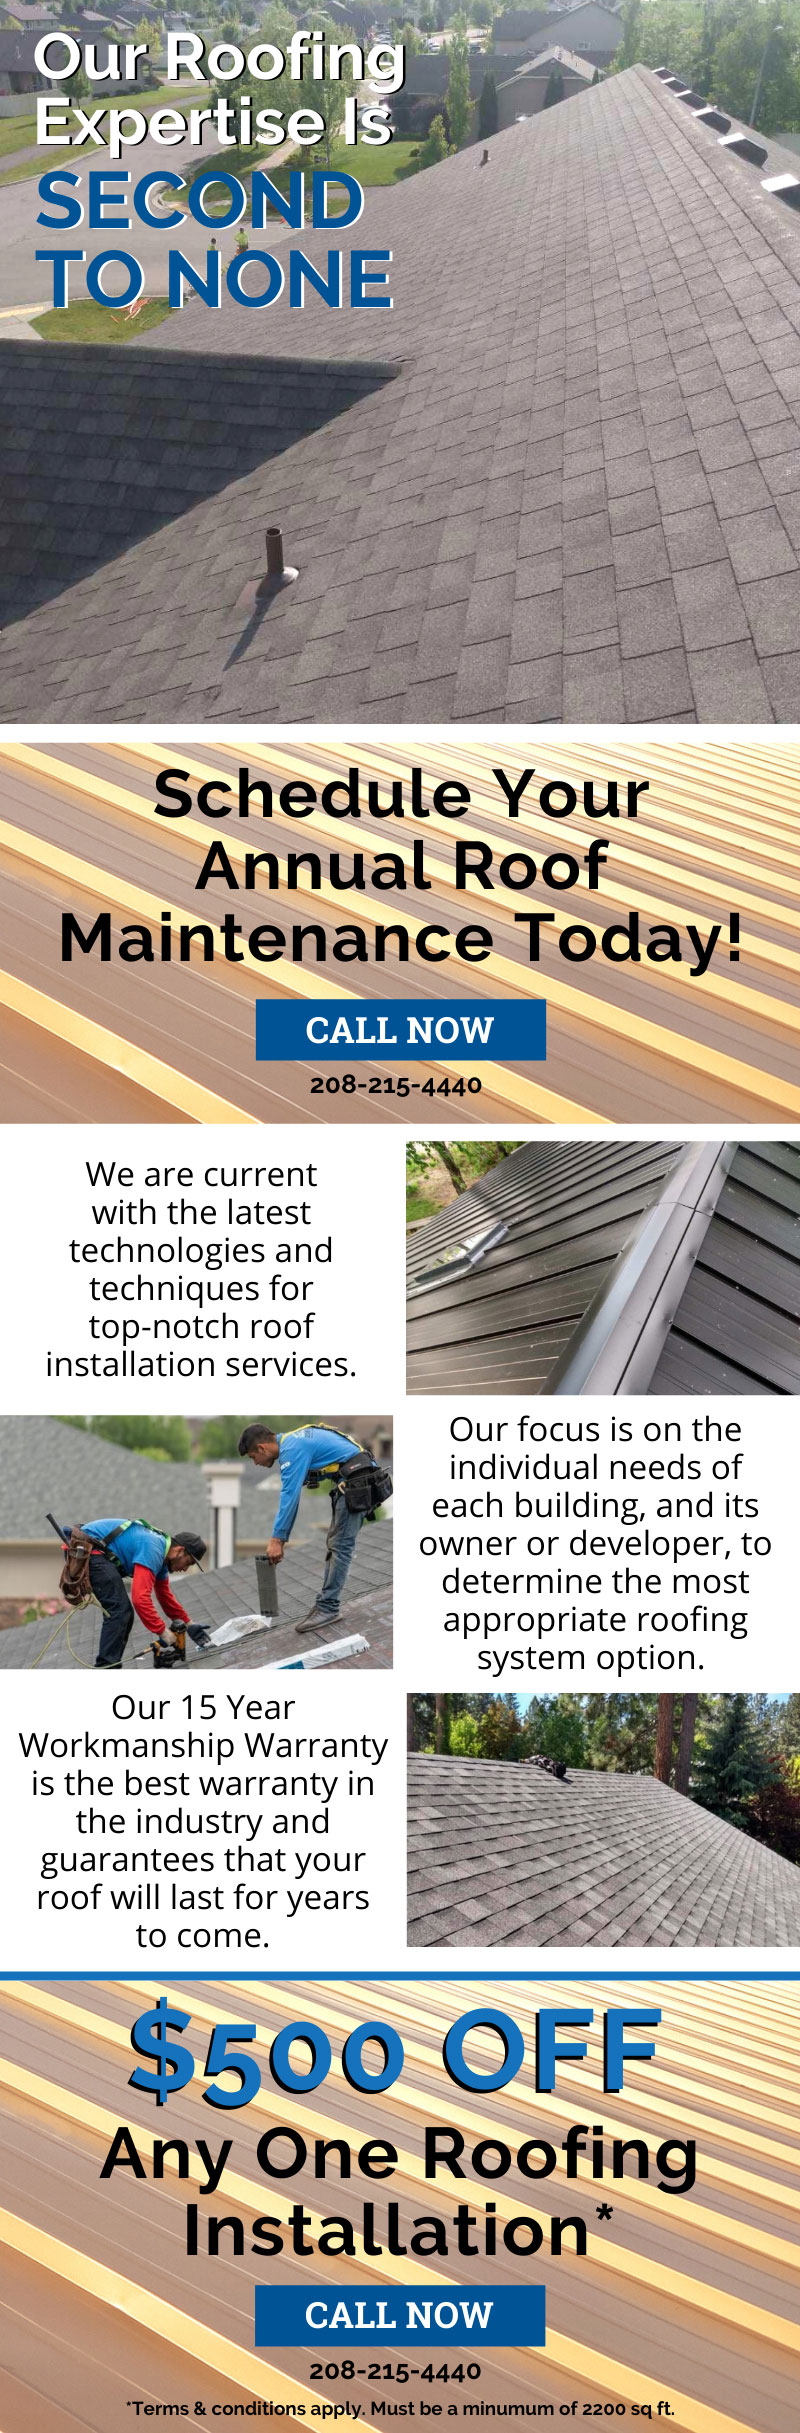 Our Roofing Expertise Is Second To None 3